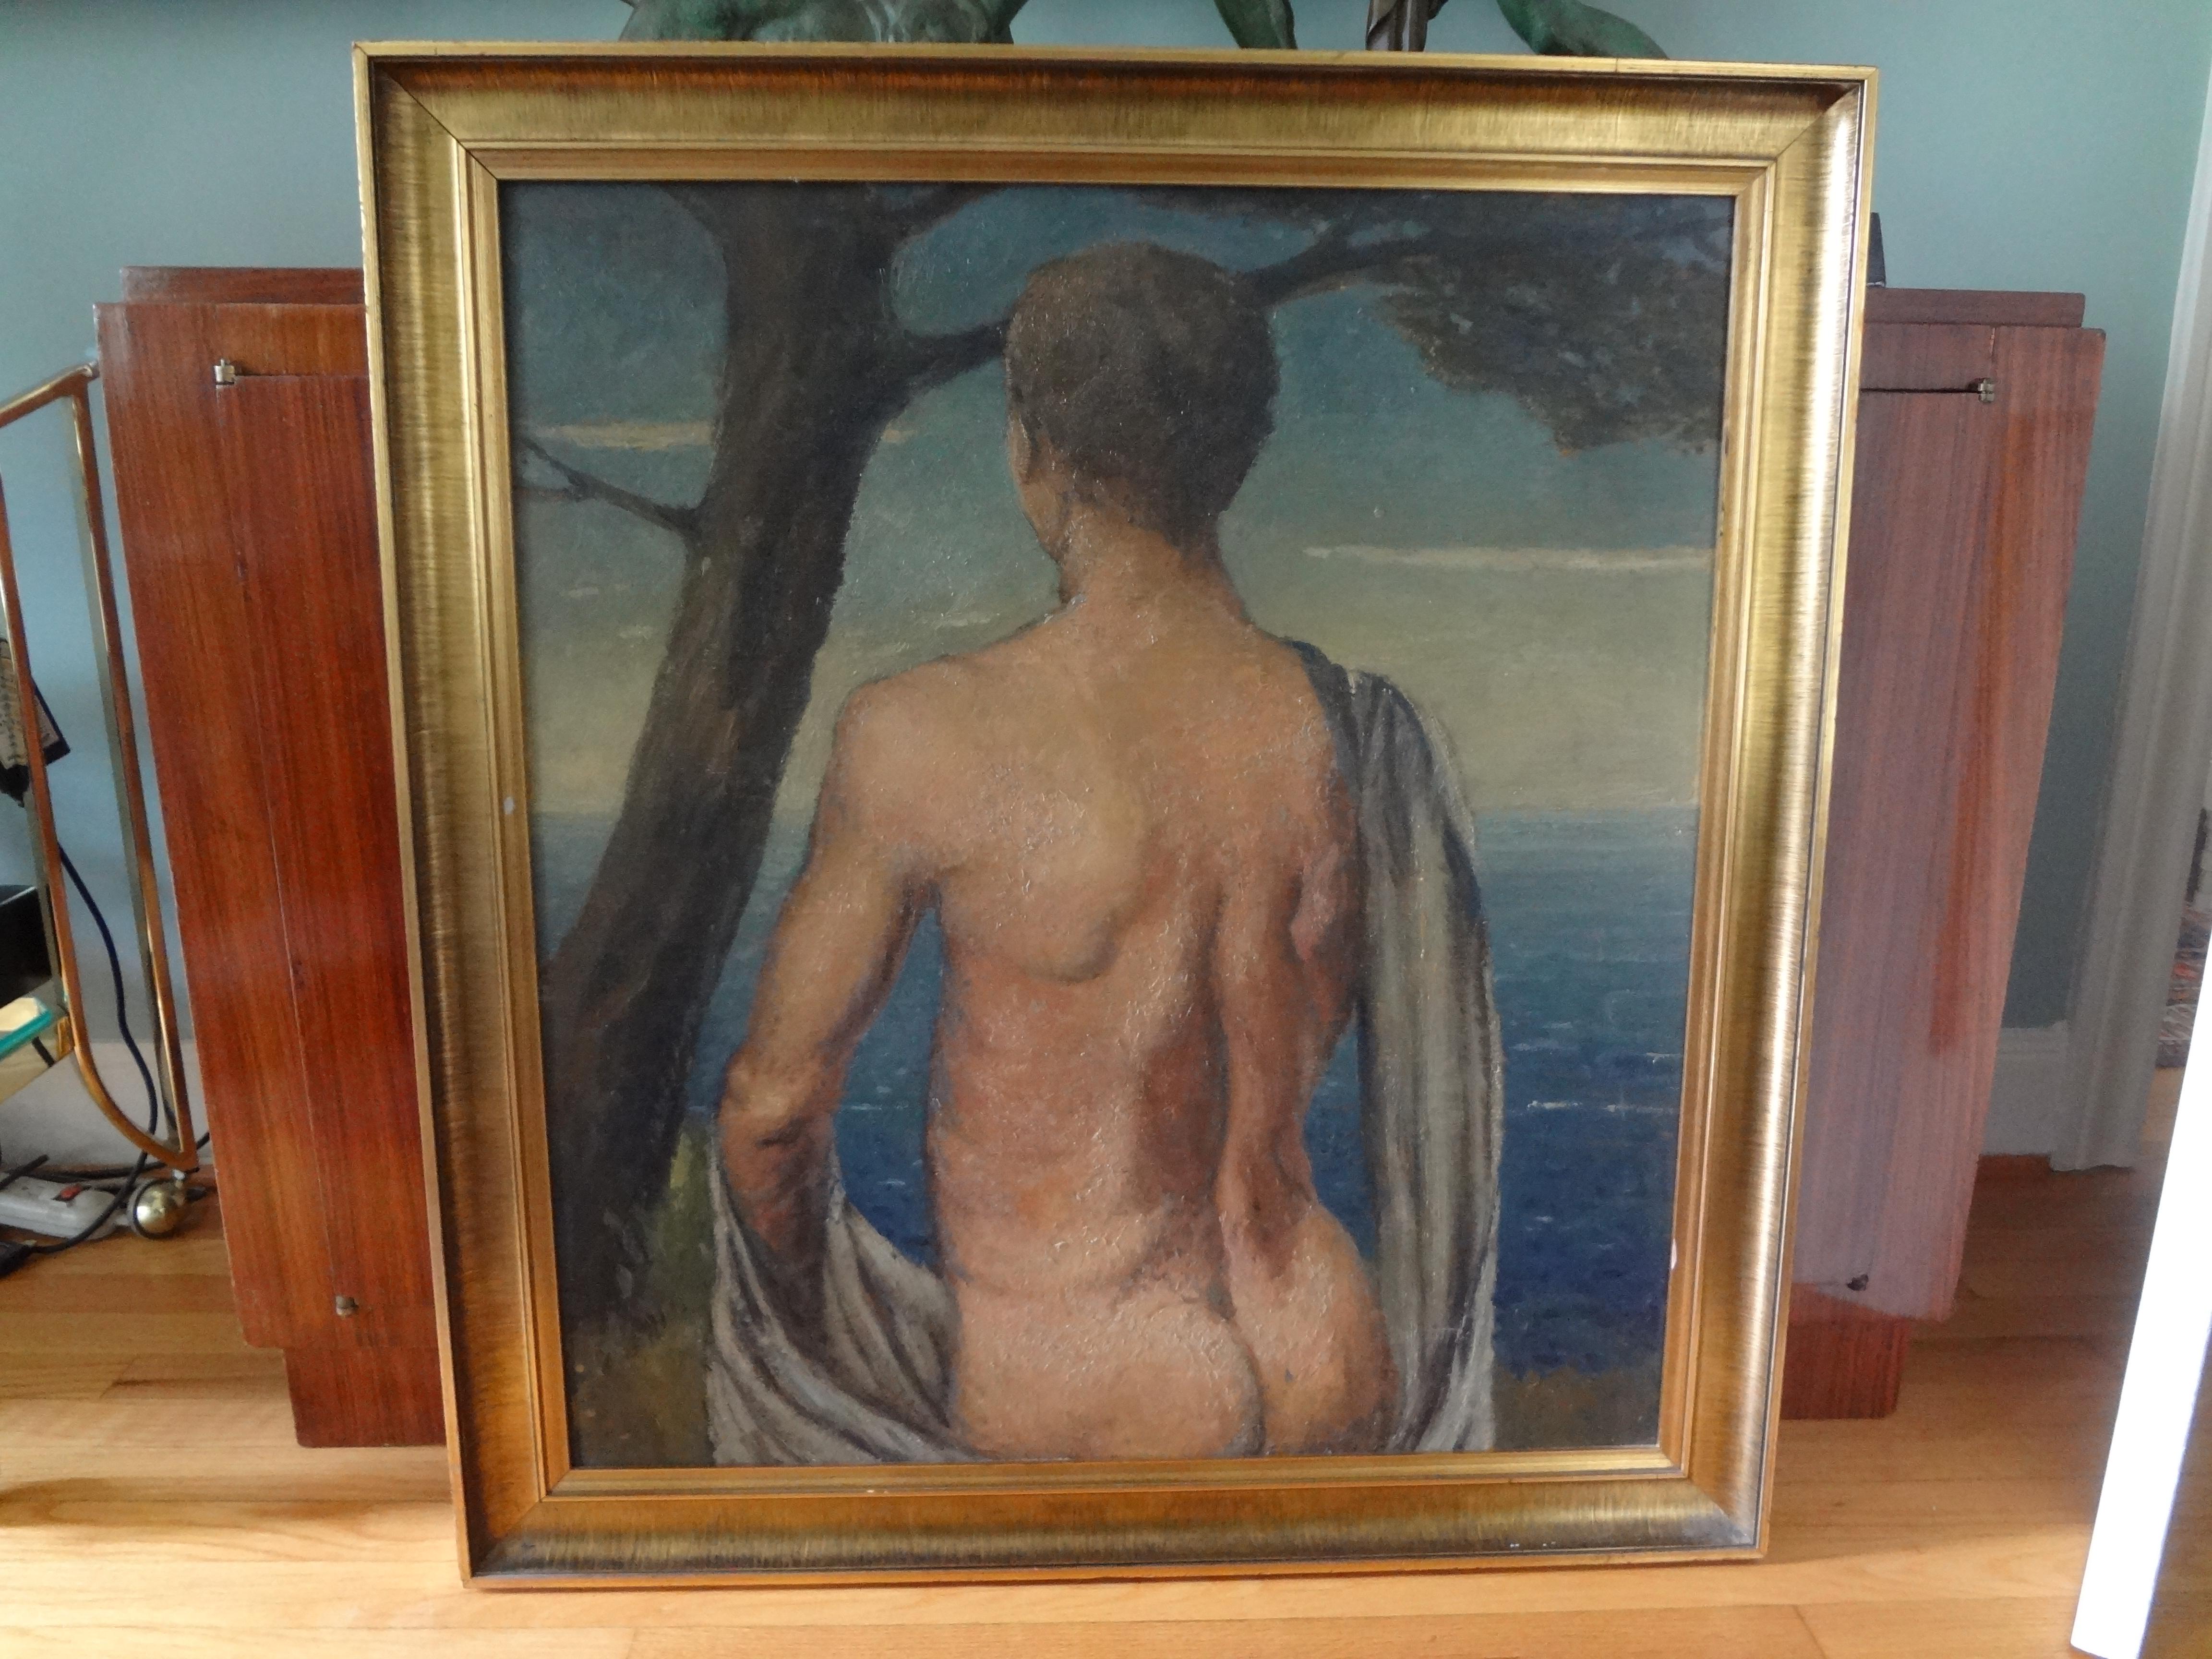 Italian male nude oil painting on wood panel, circa 1930.
Stunning and unusual framed Italian male nude oil painting on a wood panel. This Italian Art Deco oil painting dates from the 1930s. This Italian nude oil painting is well executed and in